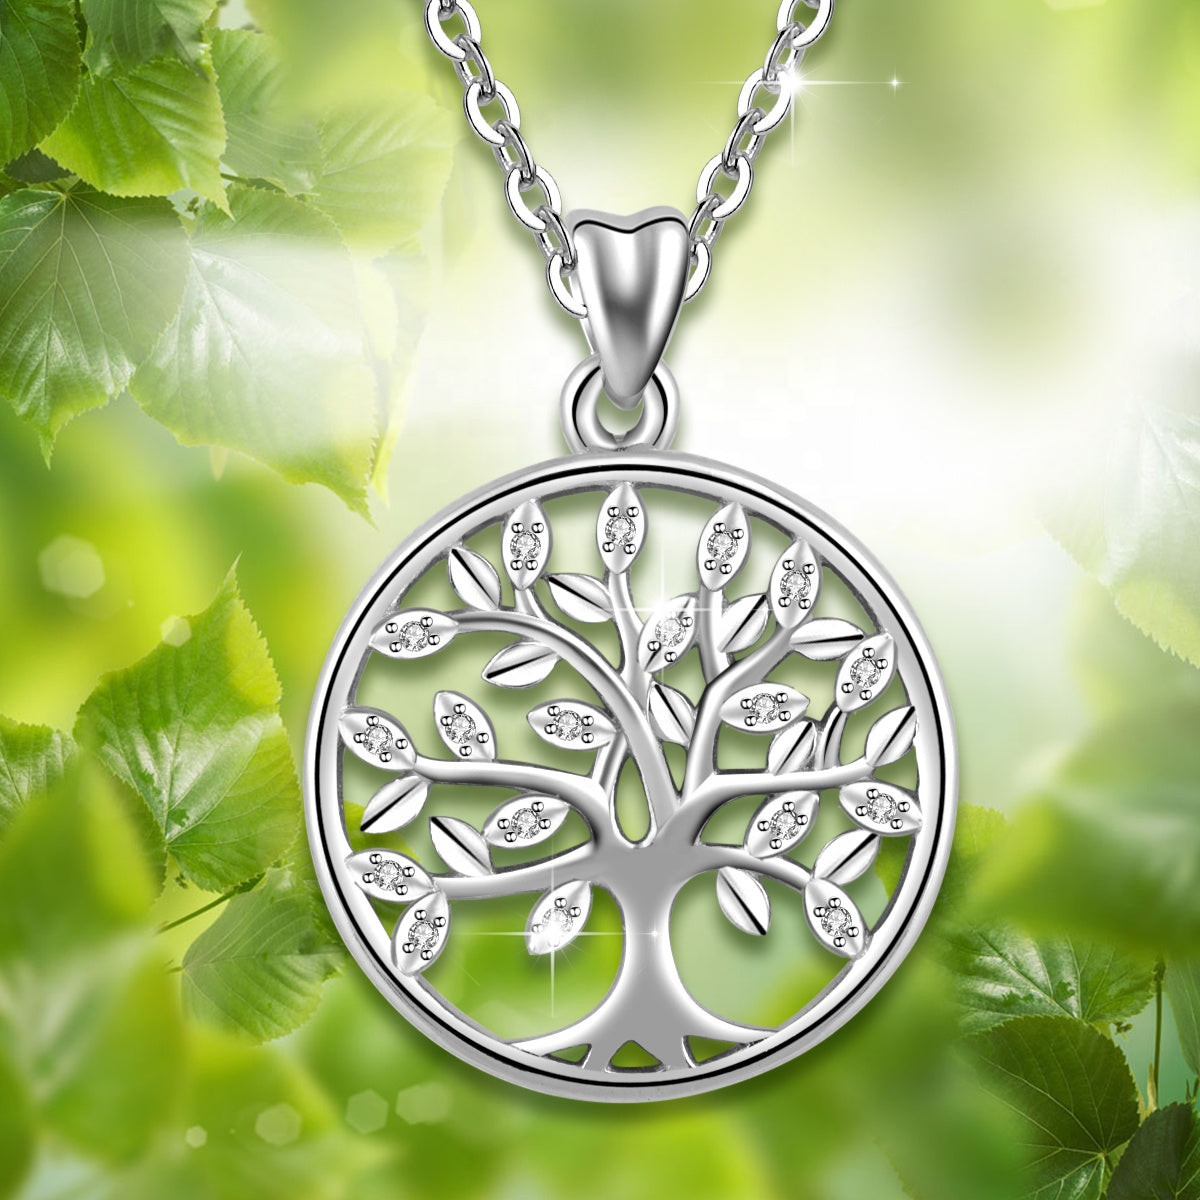 Buy Silver Tree of Life Necklace, Teardrop Shape, Gift for Mom, Sterling  Silver, Tree Pendant, Botanist, Family Tree, Nature Lover, Woodland Online  in India - Etsy